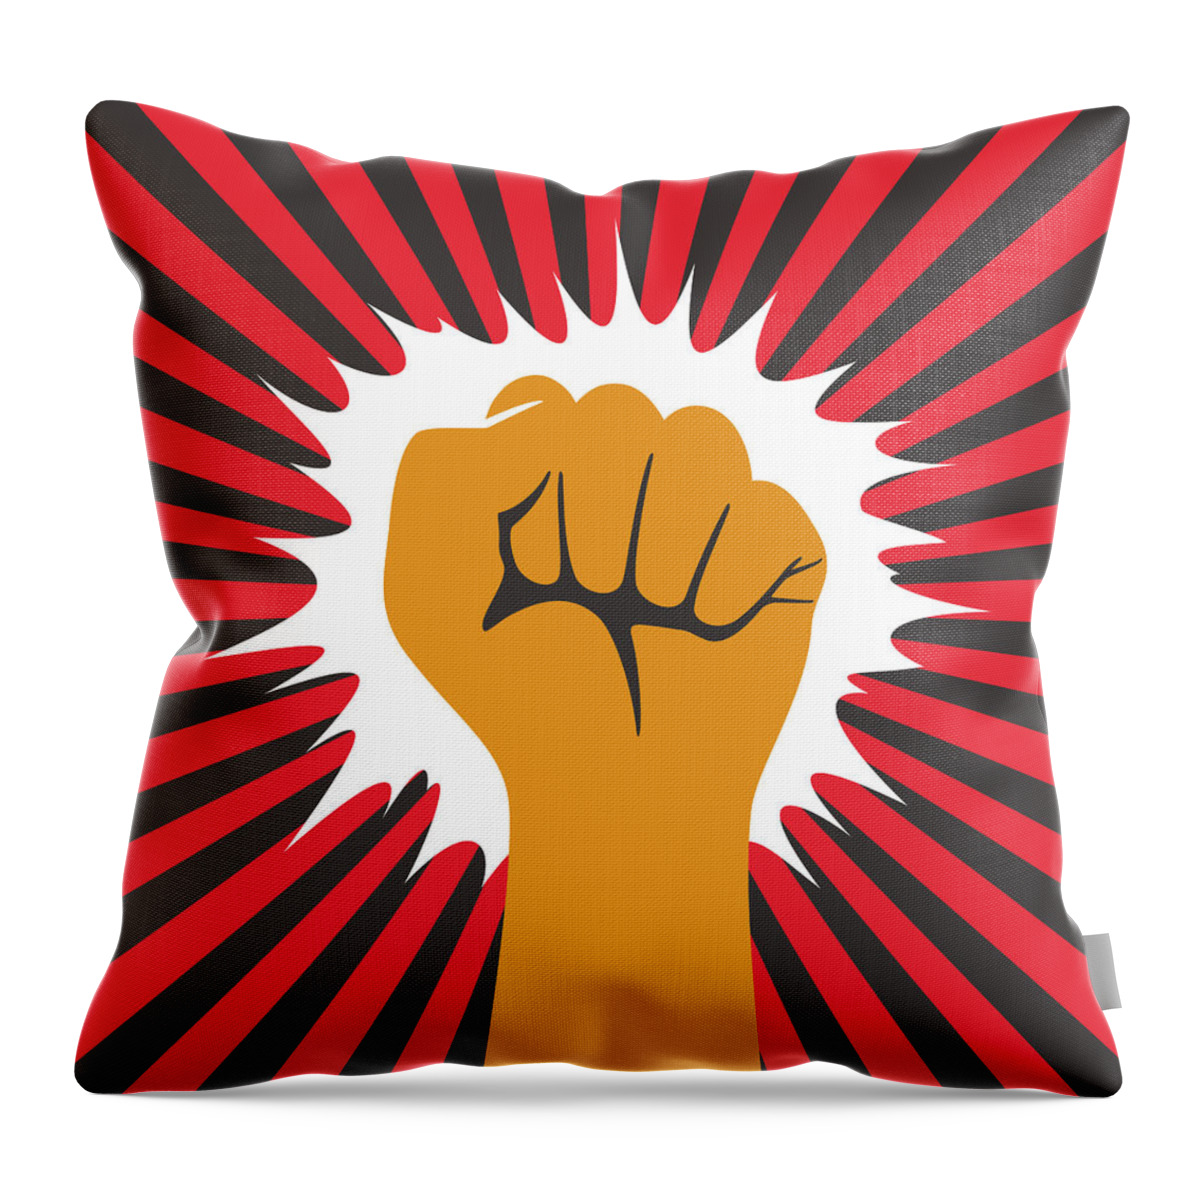 Toughness Throw Pillow featuring the digital art Fist Hand With Shining Sun by Hakule